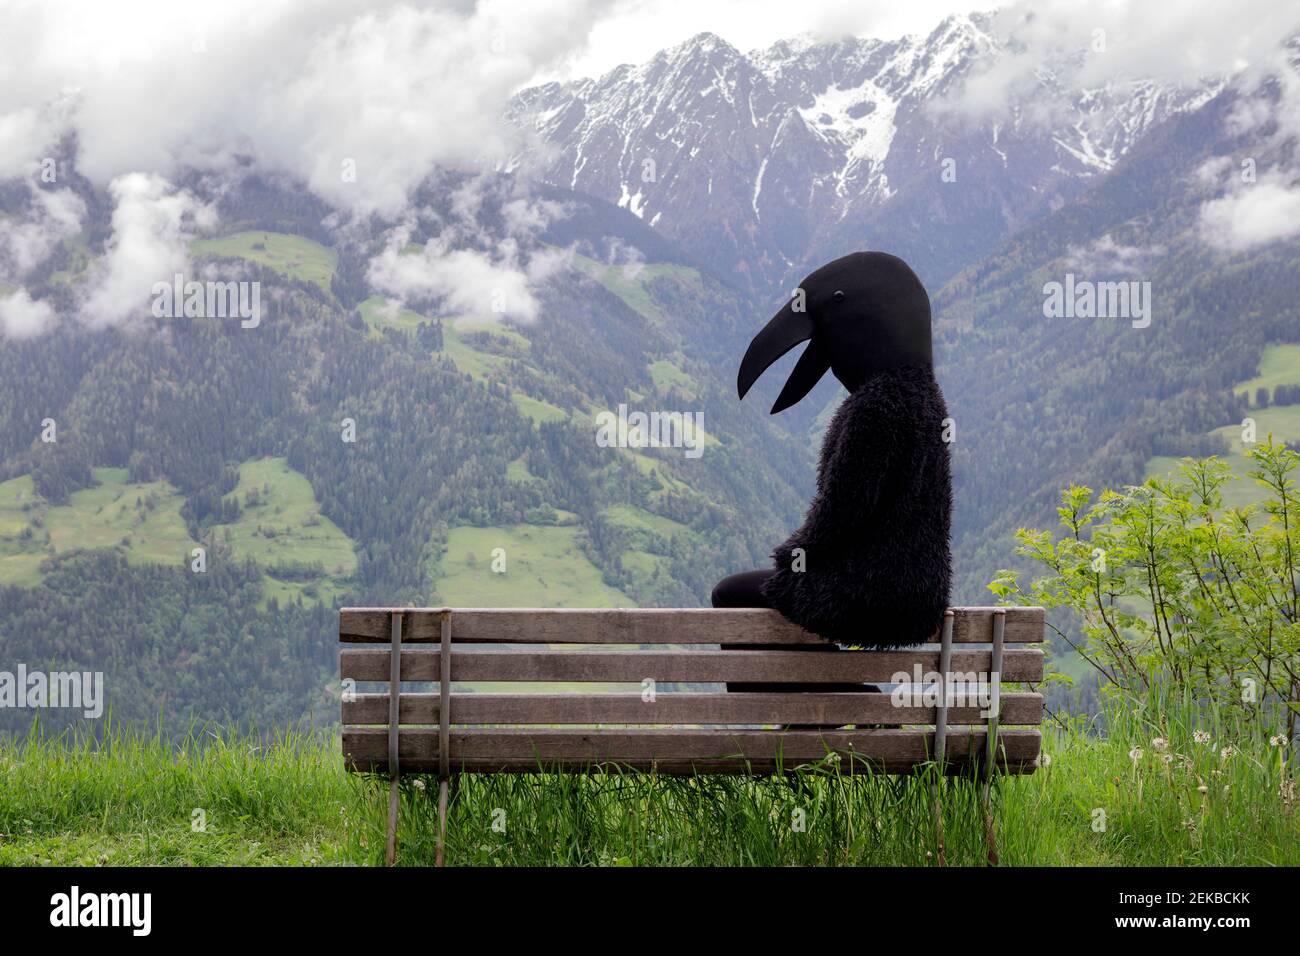 Female in crow costume sitting on bench in front of mountain range Stock Photo